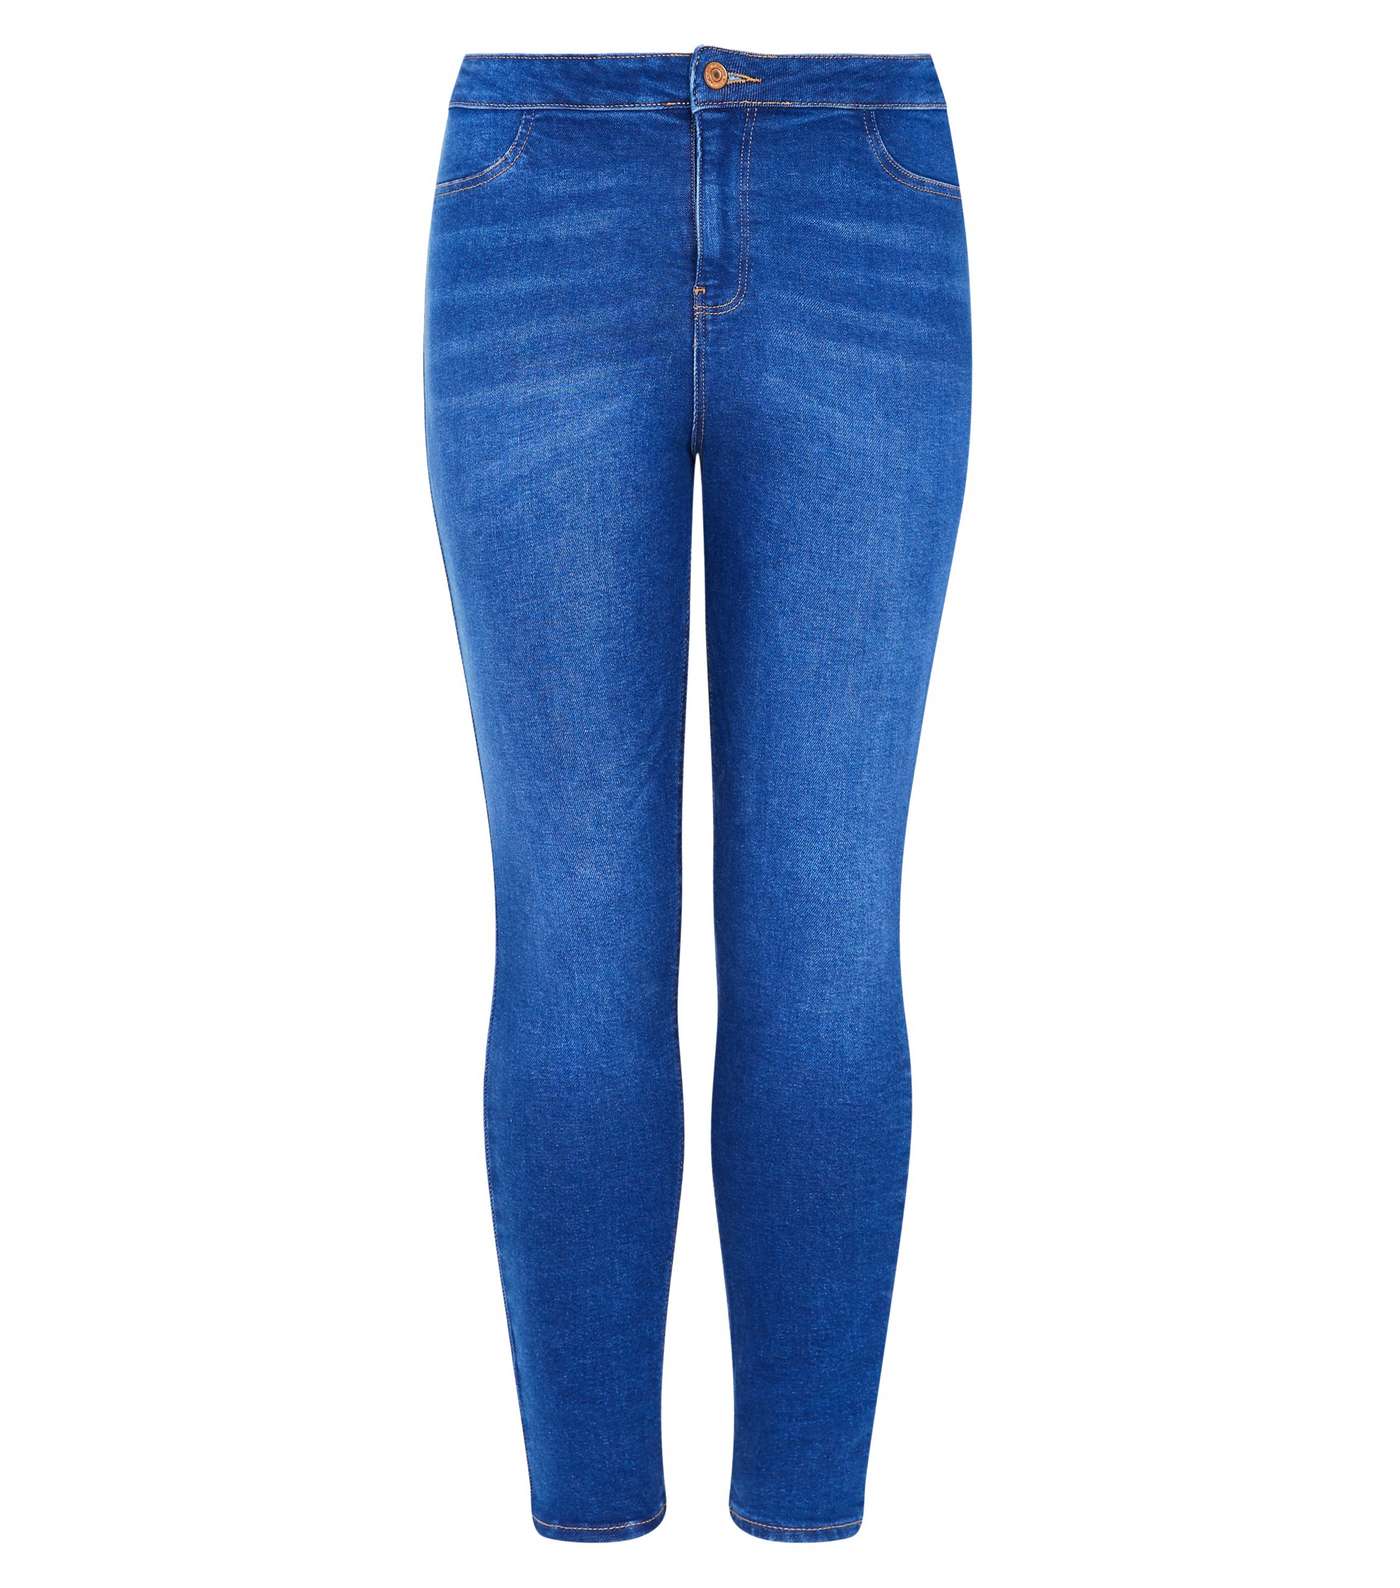 Curves Bright Blue High Waist Skinny Jeans Image 4